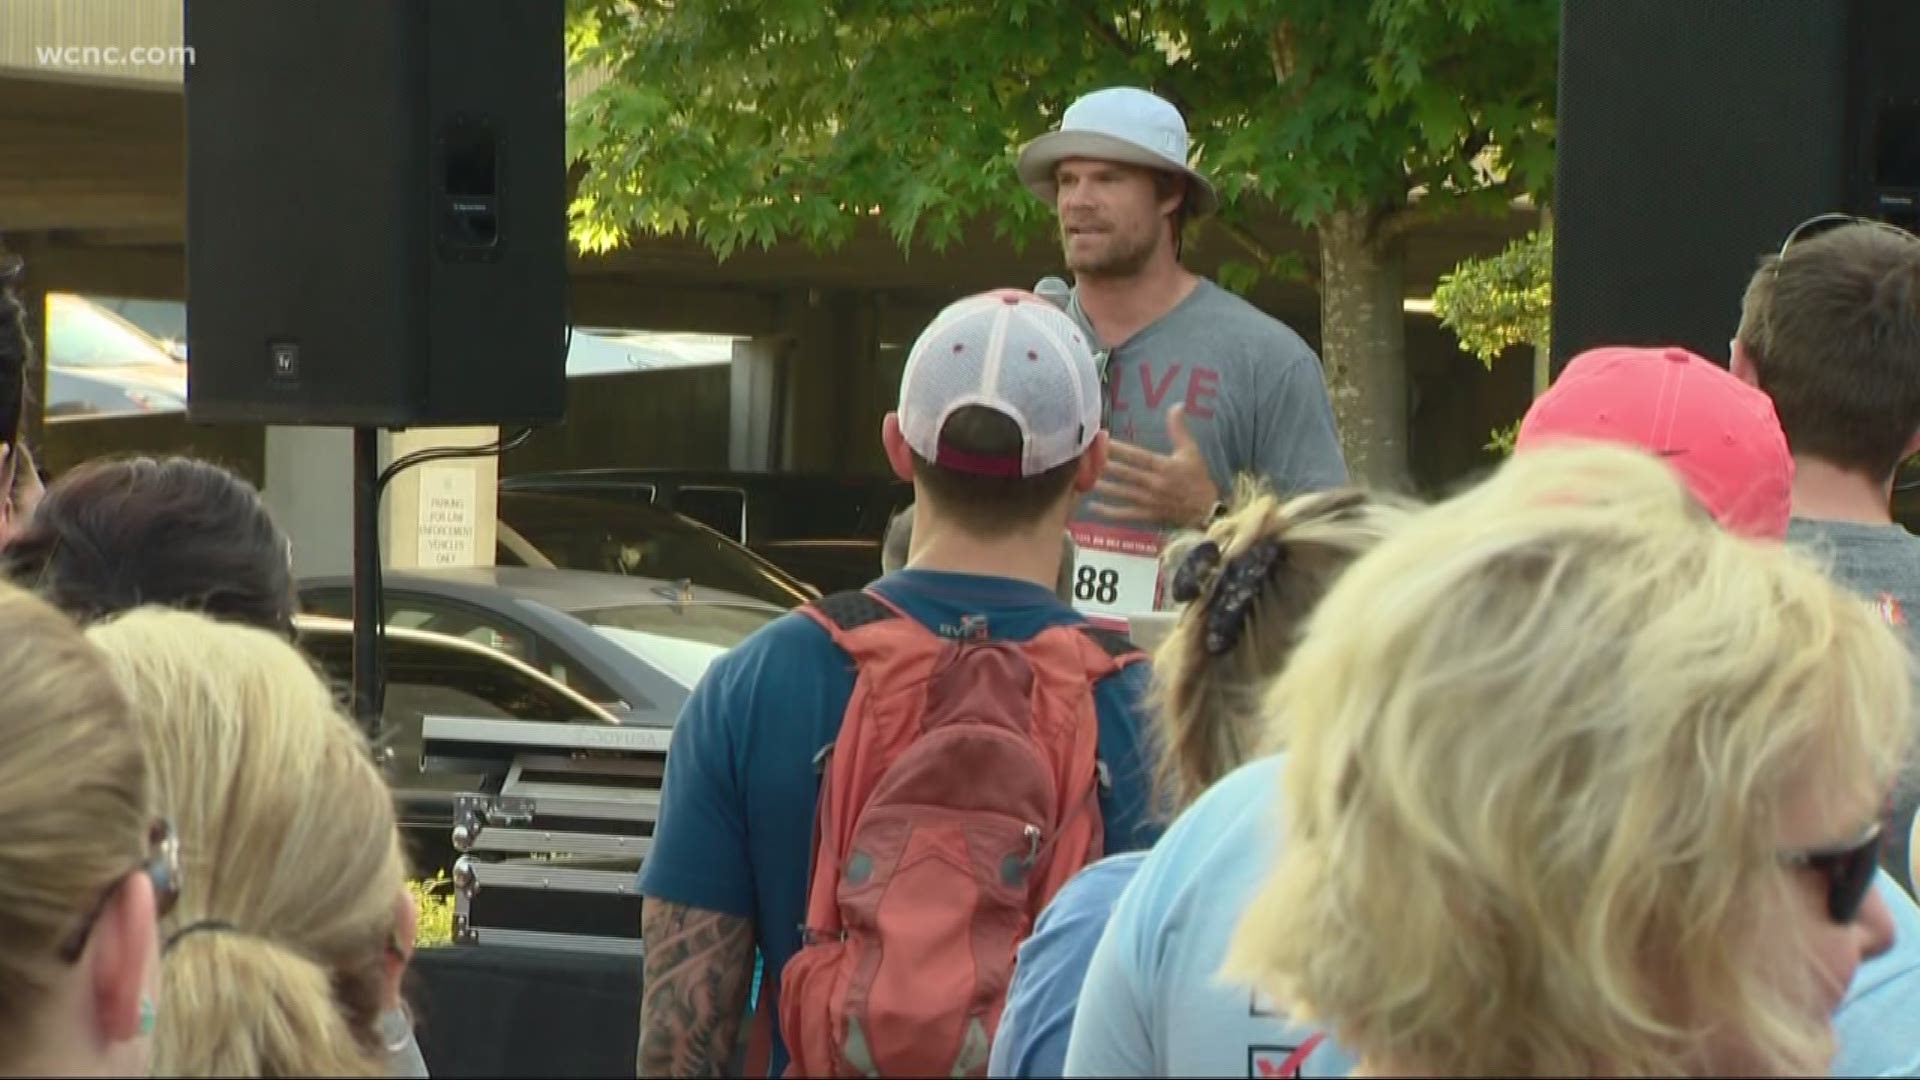 Panthers star Greg Olsen emceed the third annual "HEARTest Yard and Showmars 5K." The event raised money for children affected by congenital heart disease.